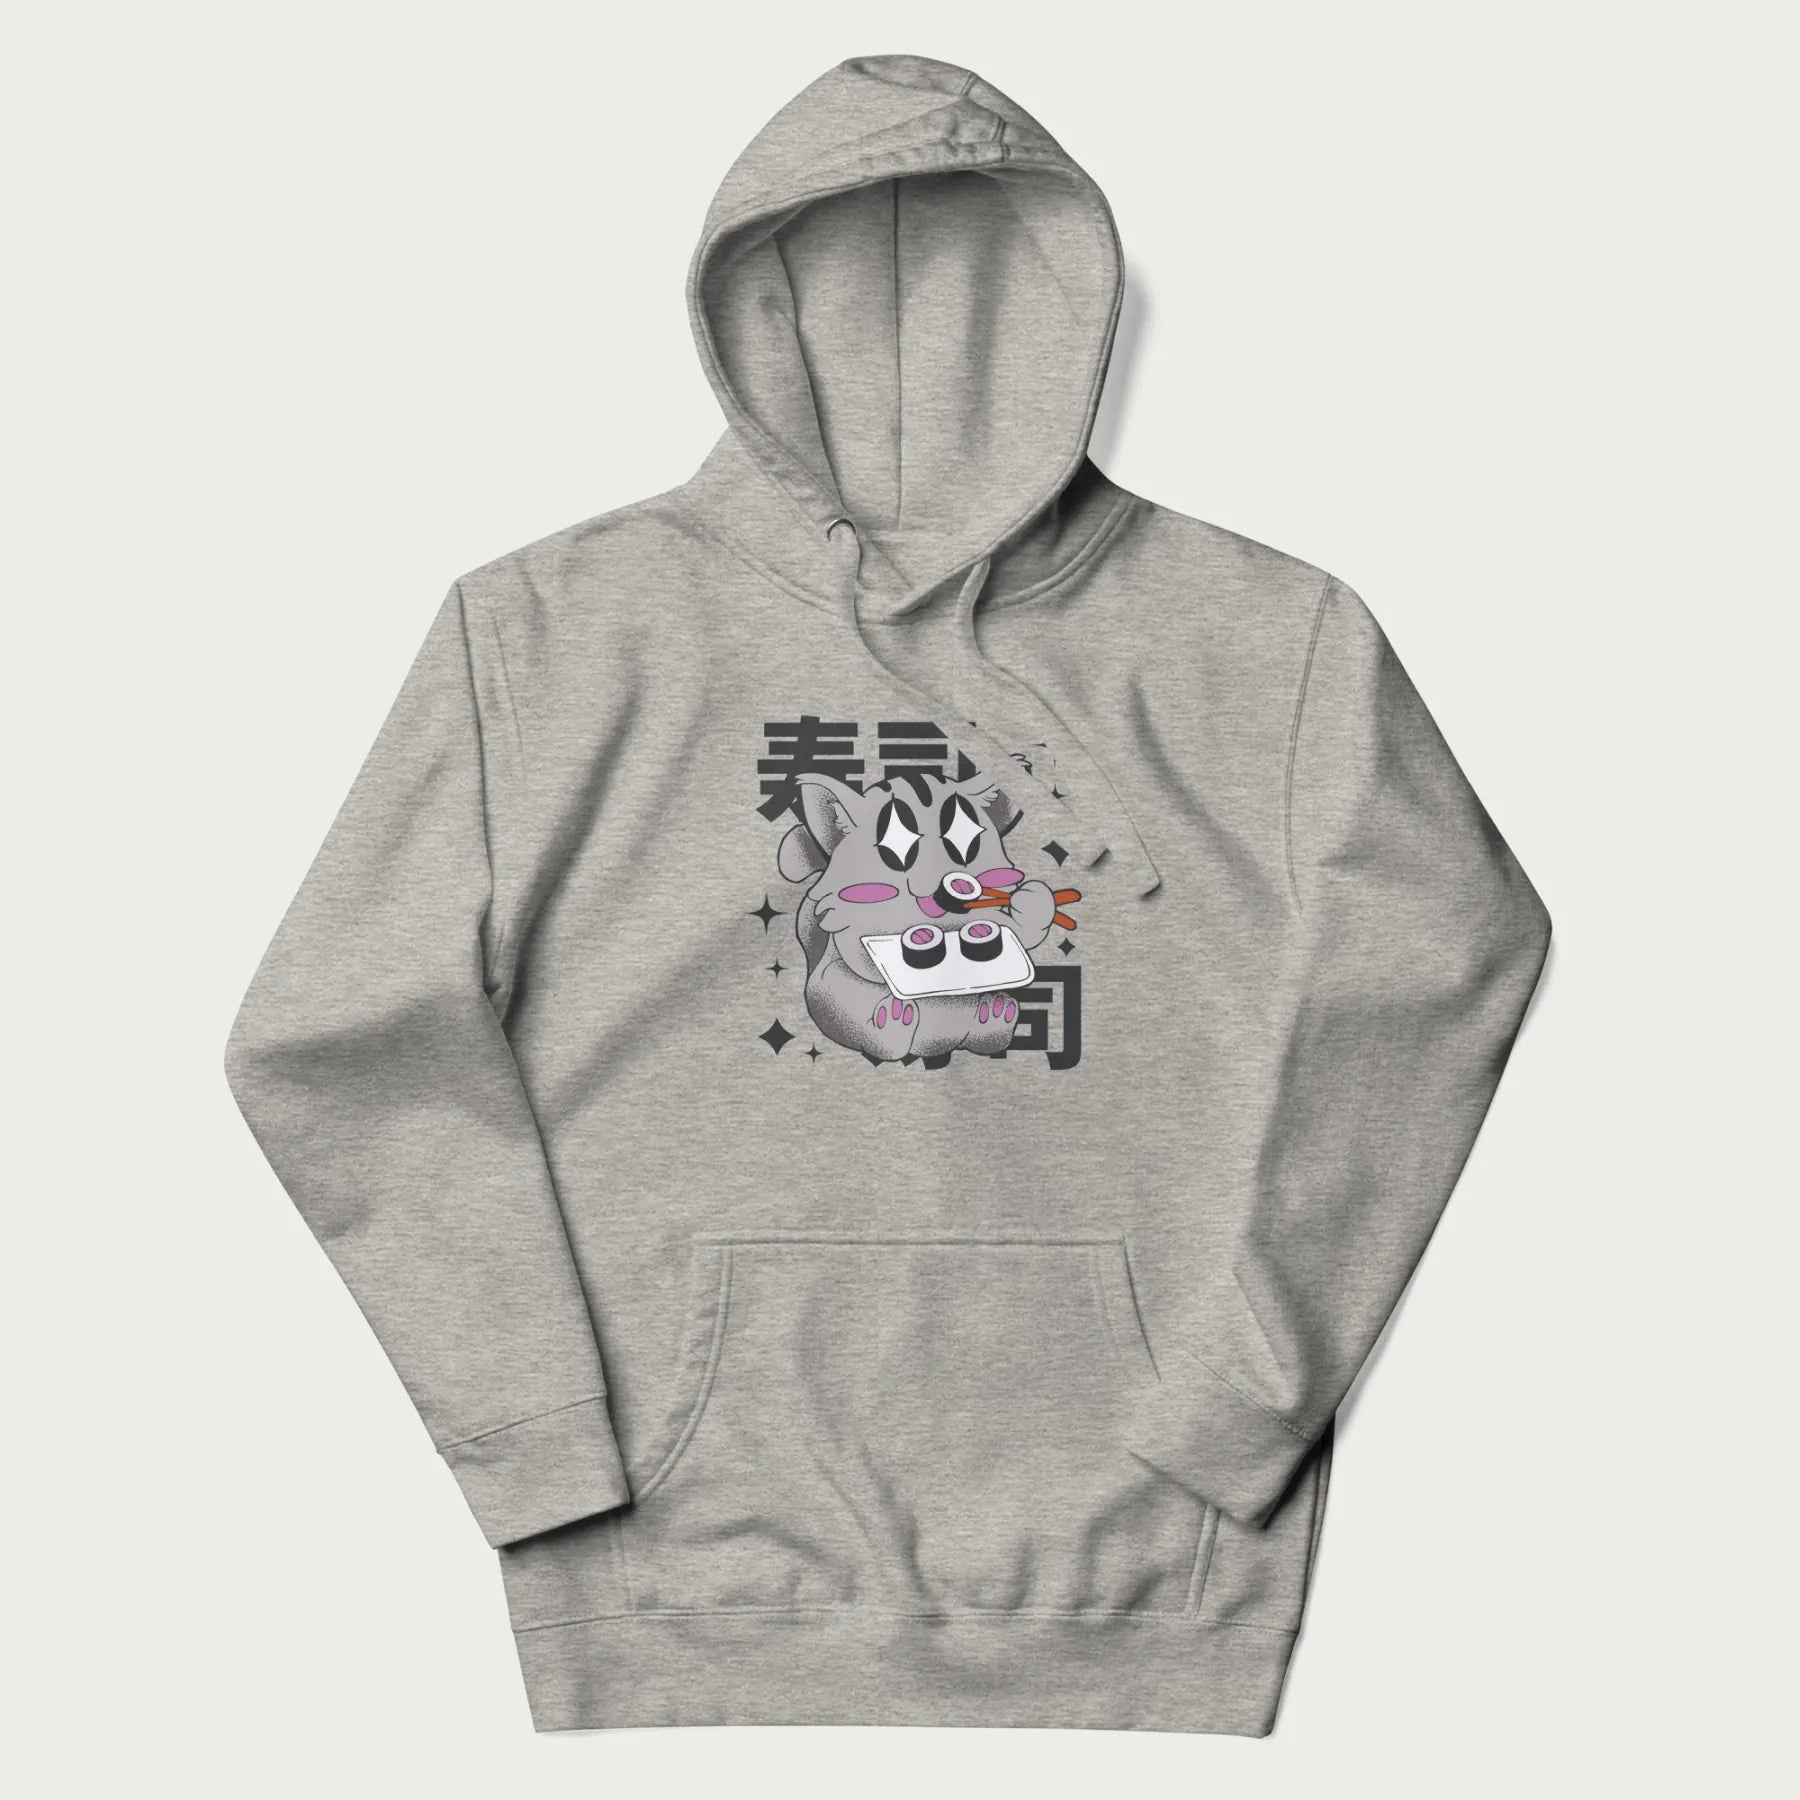 Light grey hoodie with Japanese graphic of a cute grey cat eating sushi, with the Japanese text '寿司' (Sushi) in the background.